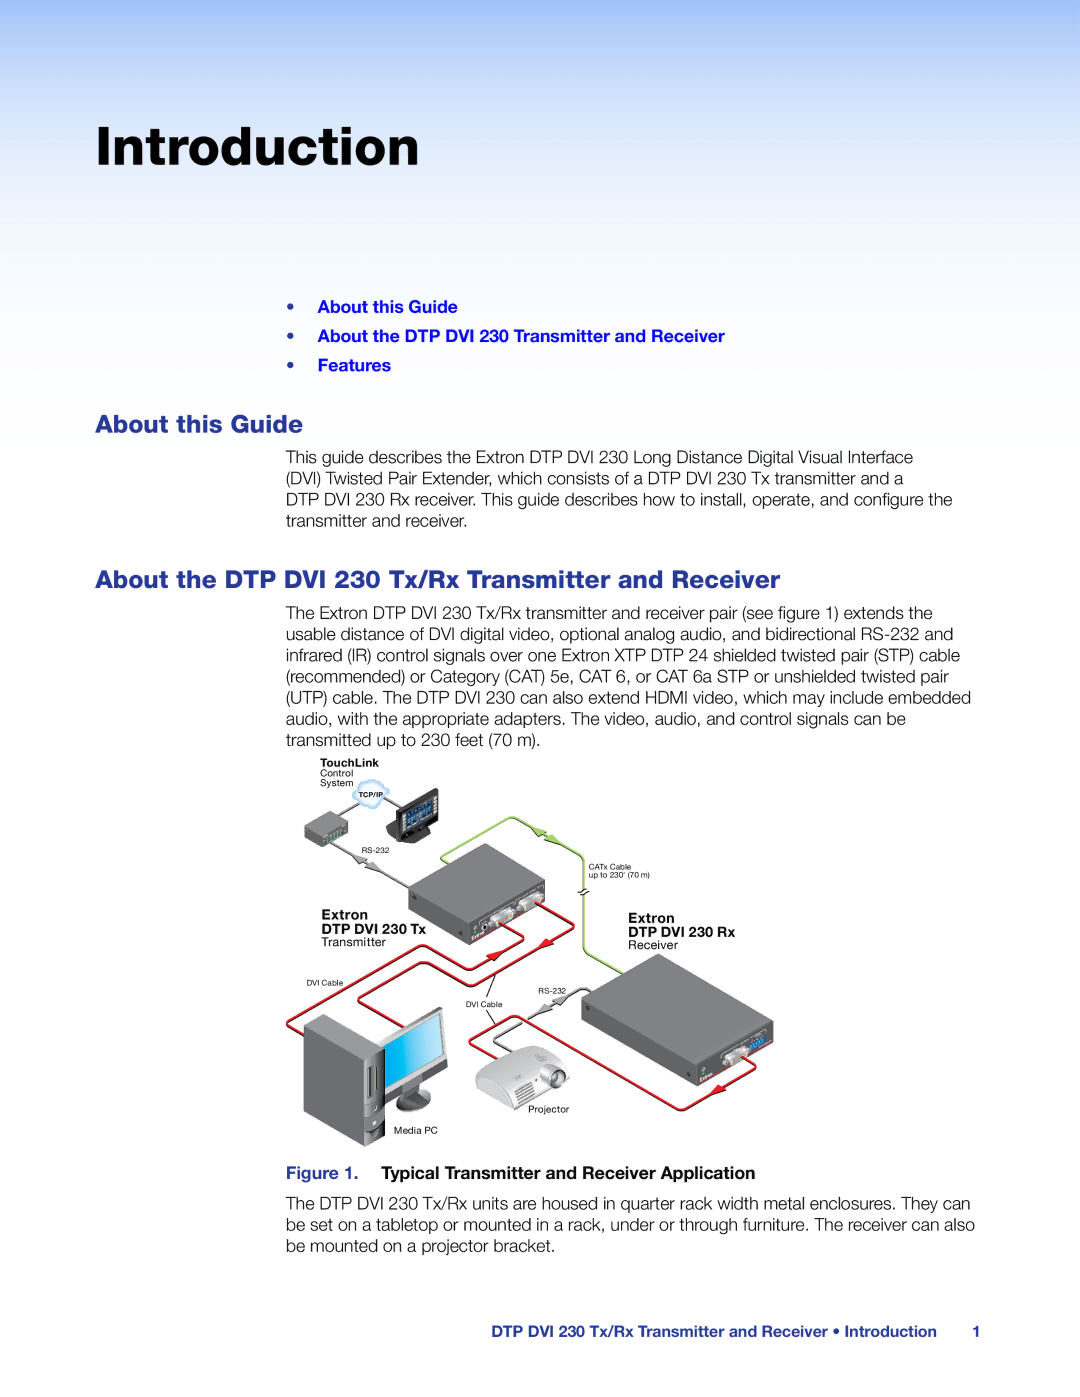 Extron electronic manual Introduction, About this Guide, About the DTP DVI 230 Tx/Rx Transmitter and Receiver 